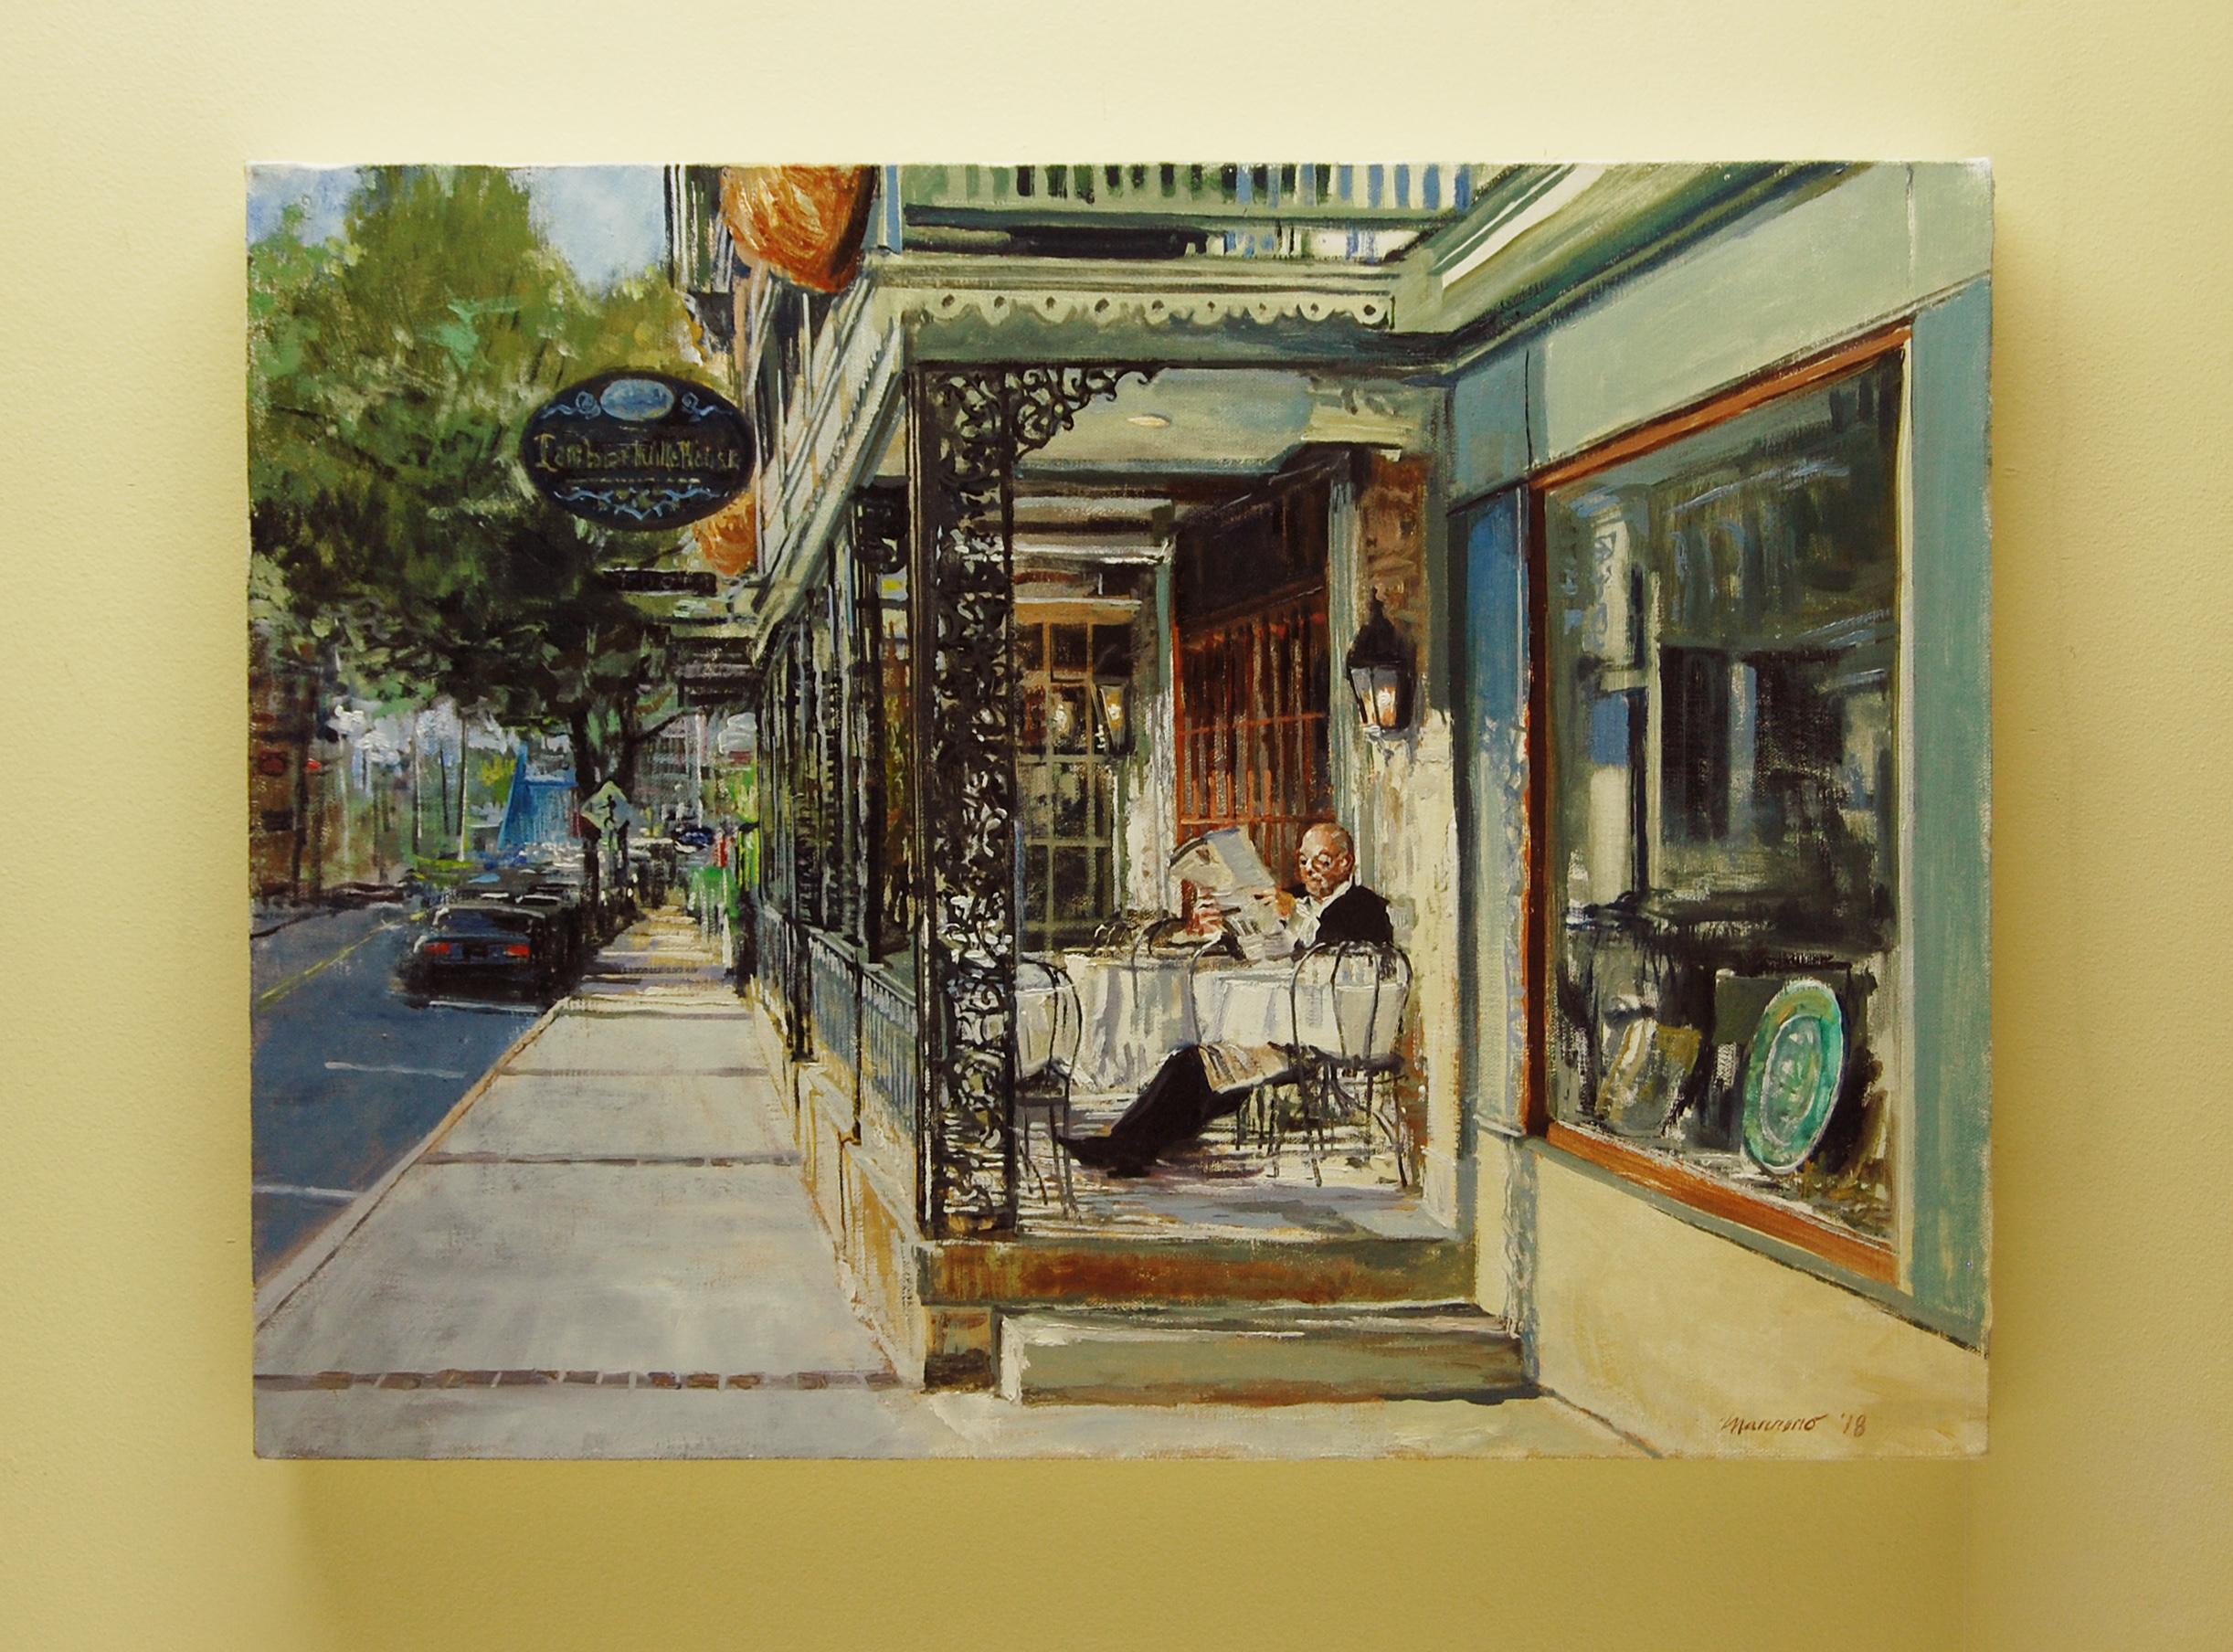 <p>Artist Comments<br />This painting depicts a historic road in Lambertville, NJ that leads to New Hope in Pennsylvania. My wife and I enjoy visiting both locations because they feature antique shops, art galleries, craft shops and bustling